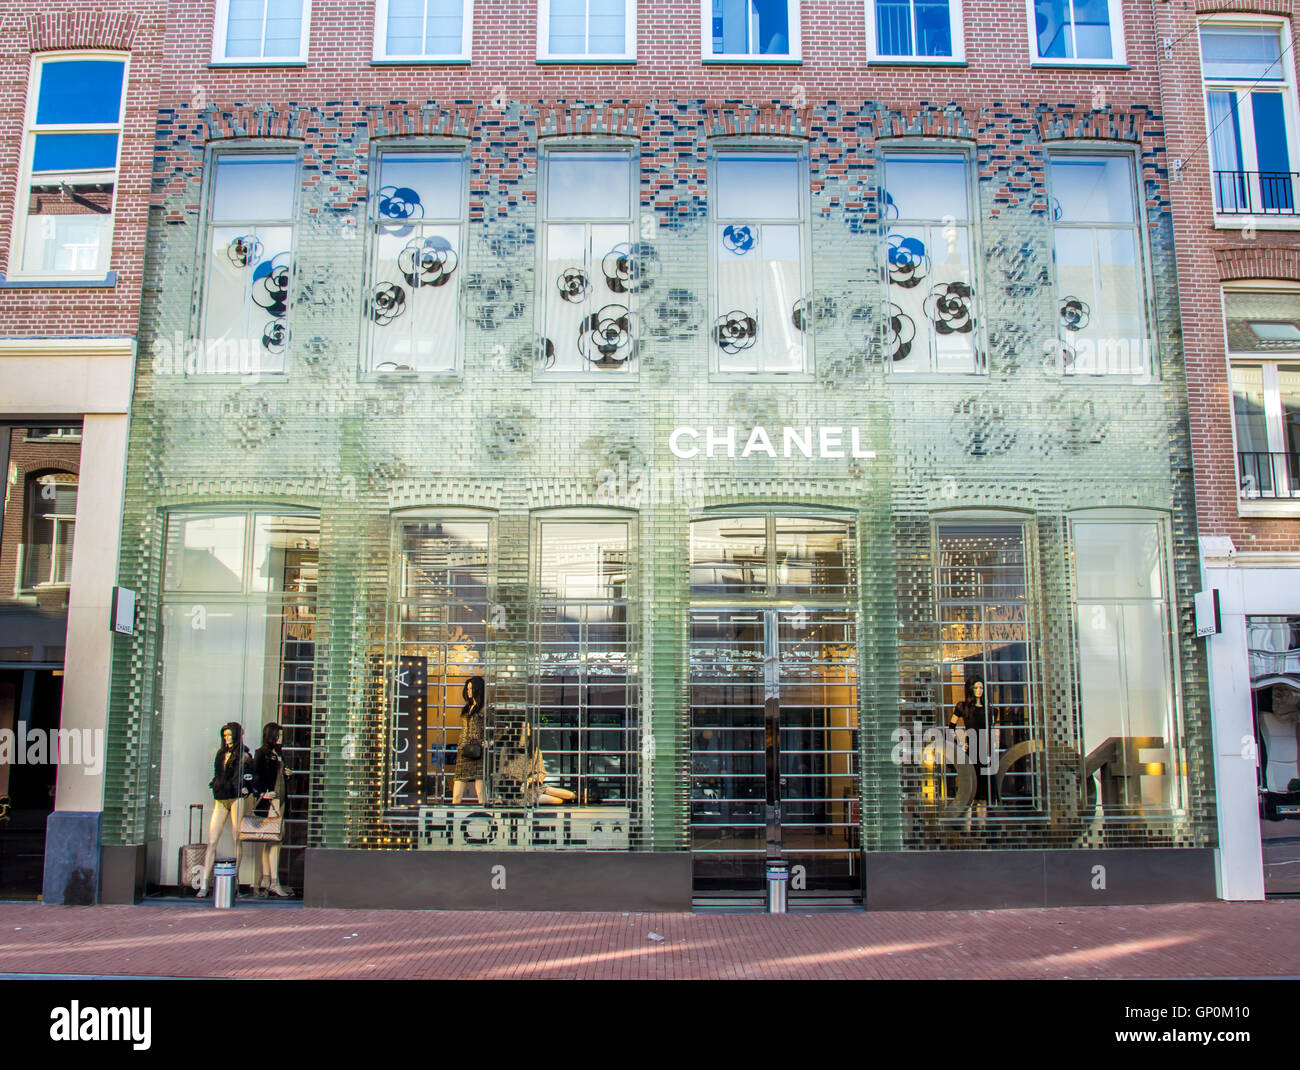 Amsterdam , the Netherlands - April 13, 2016: chanel store in P.C. Hooftstraat Amsterdam Stock Photo